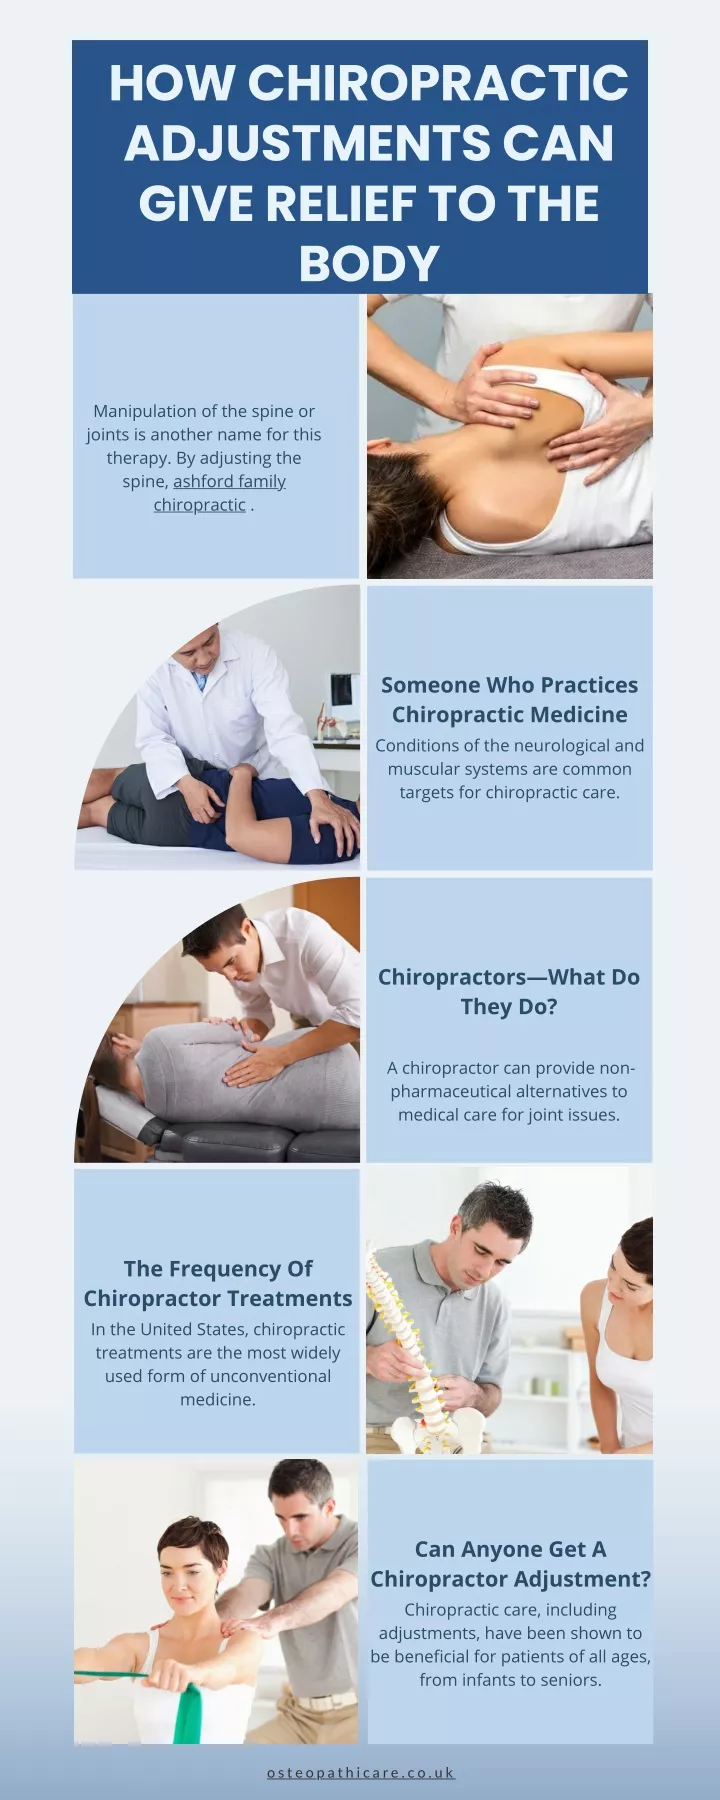 how chiropractic adjustments can give relief